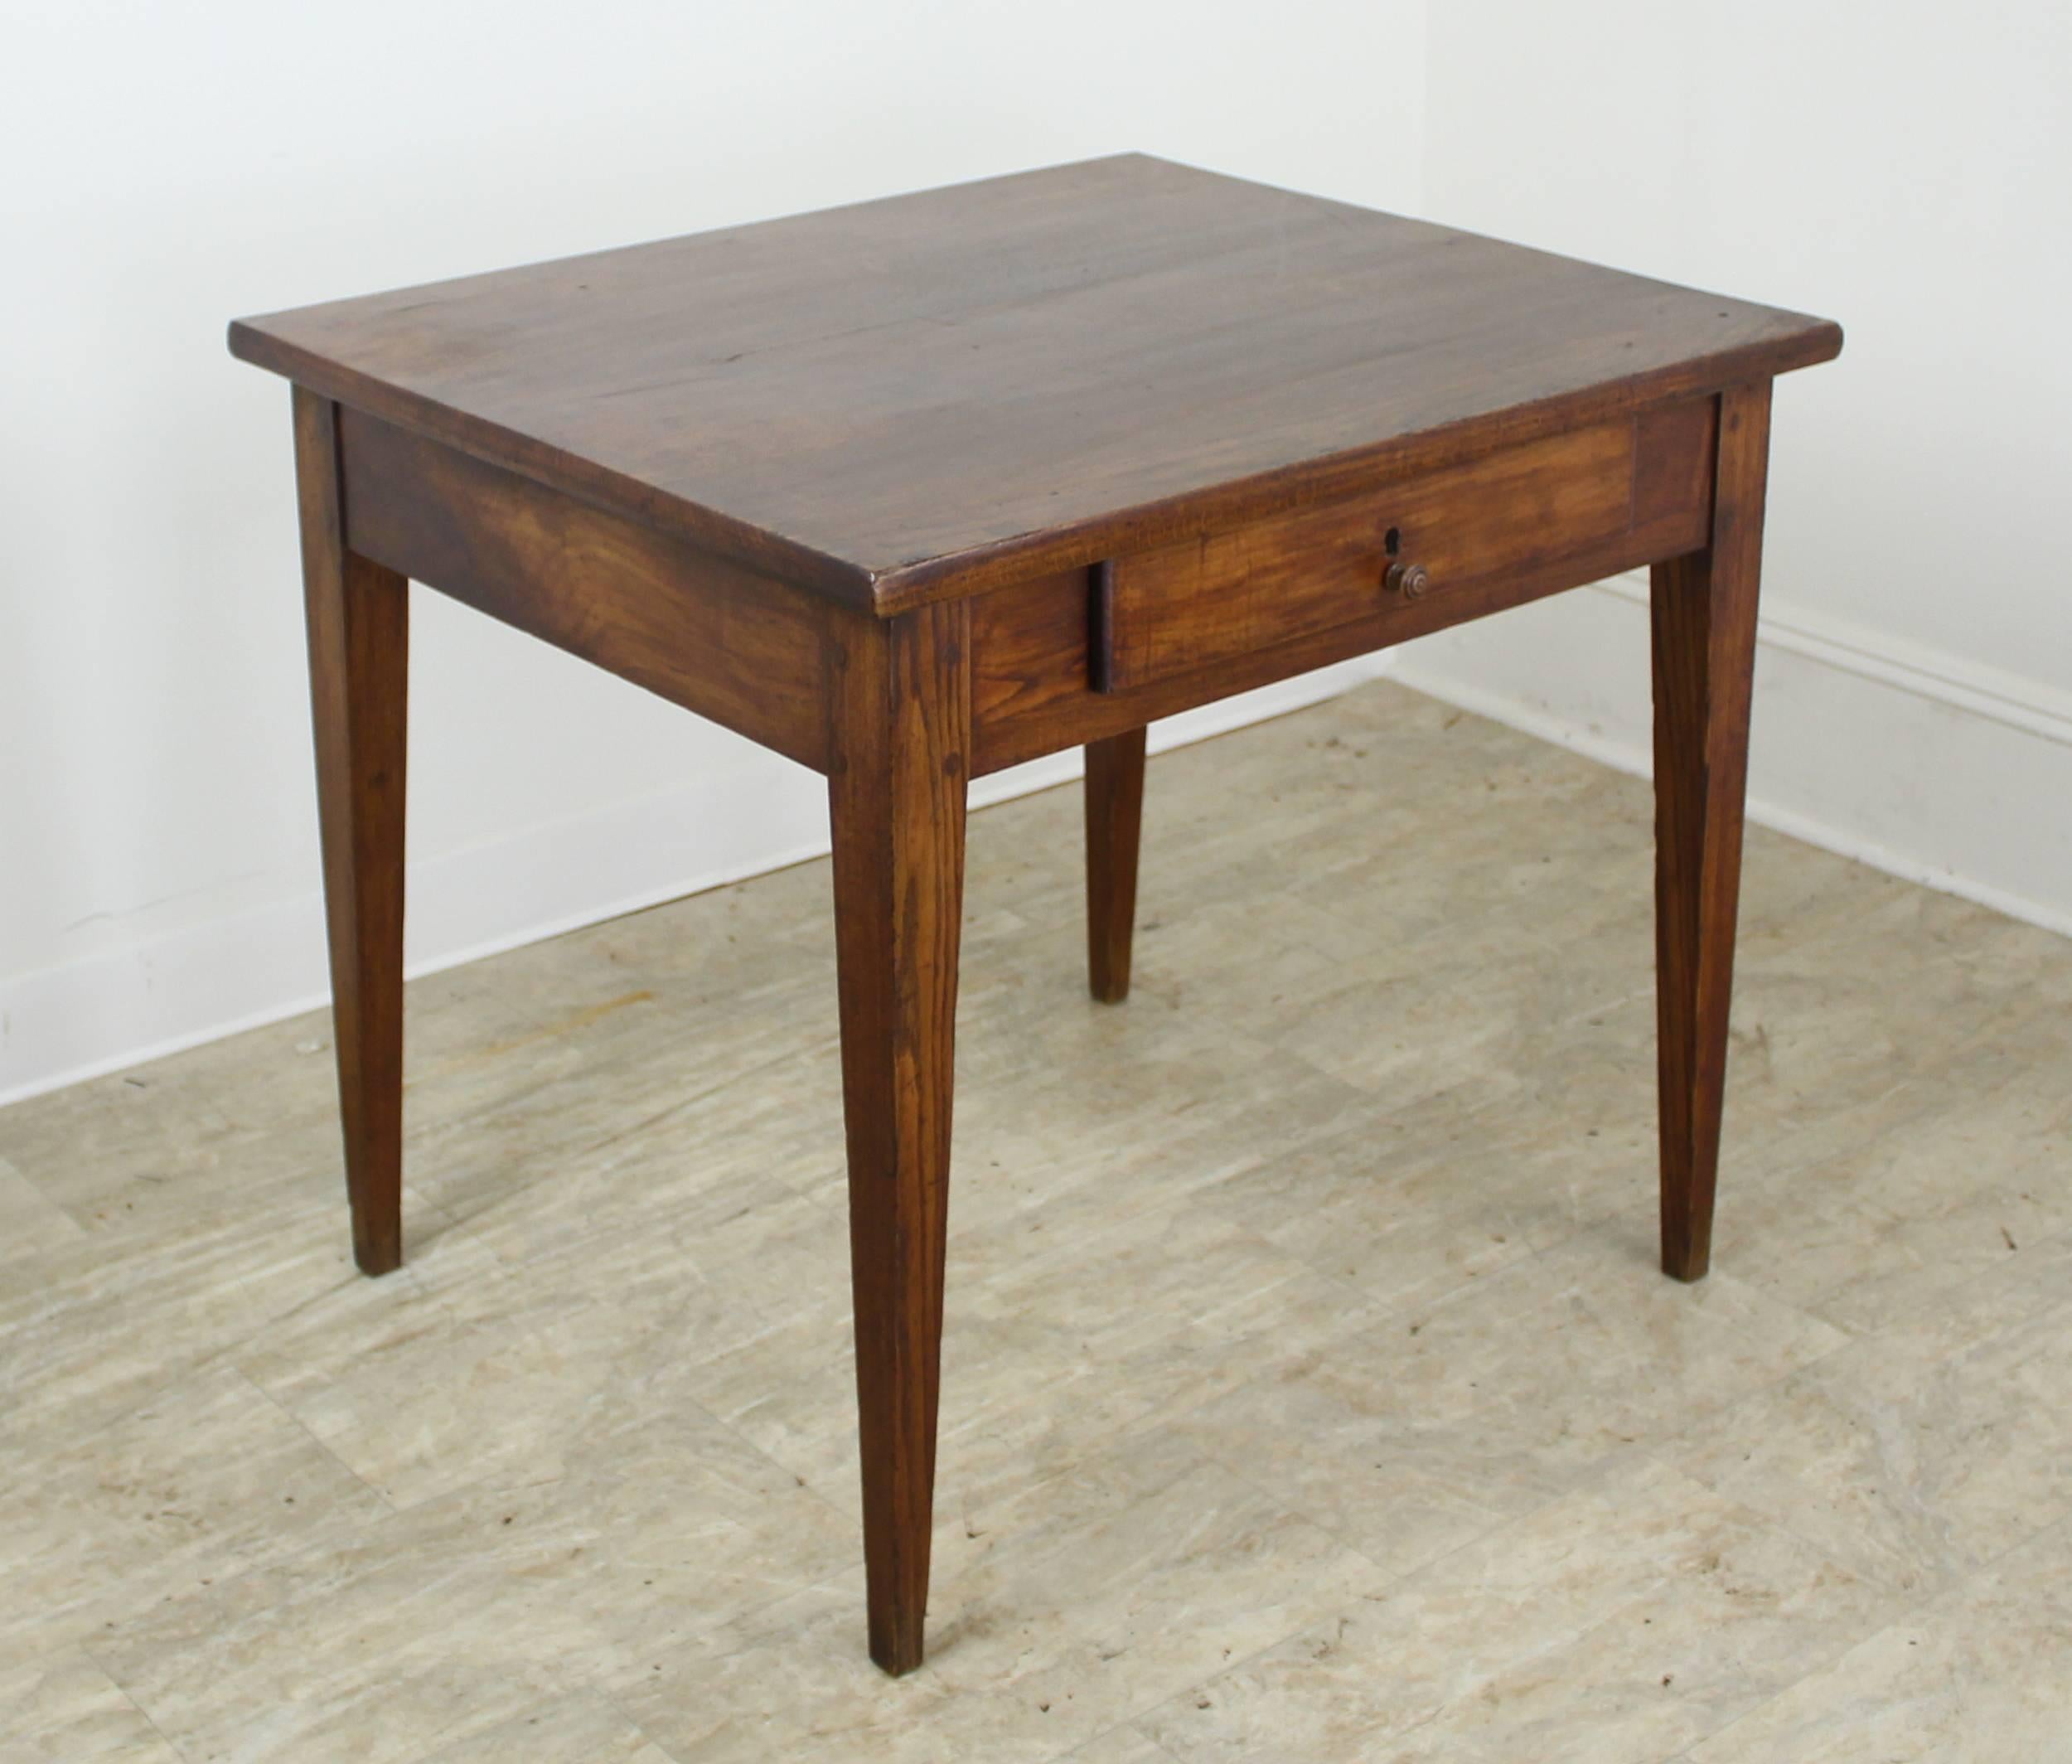 A small elm farm table with a chunky top and traditional tapered legs with single drawer. Good color and patina. Classic.